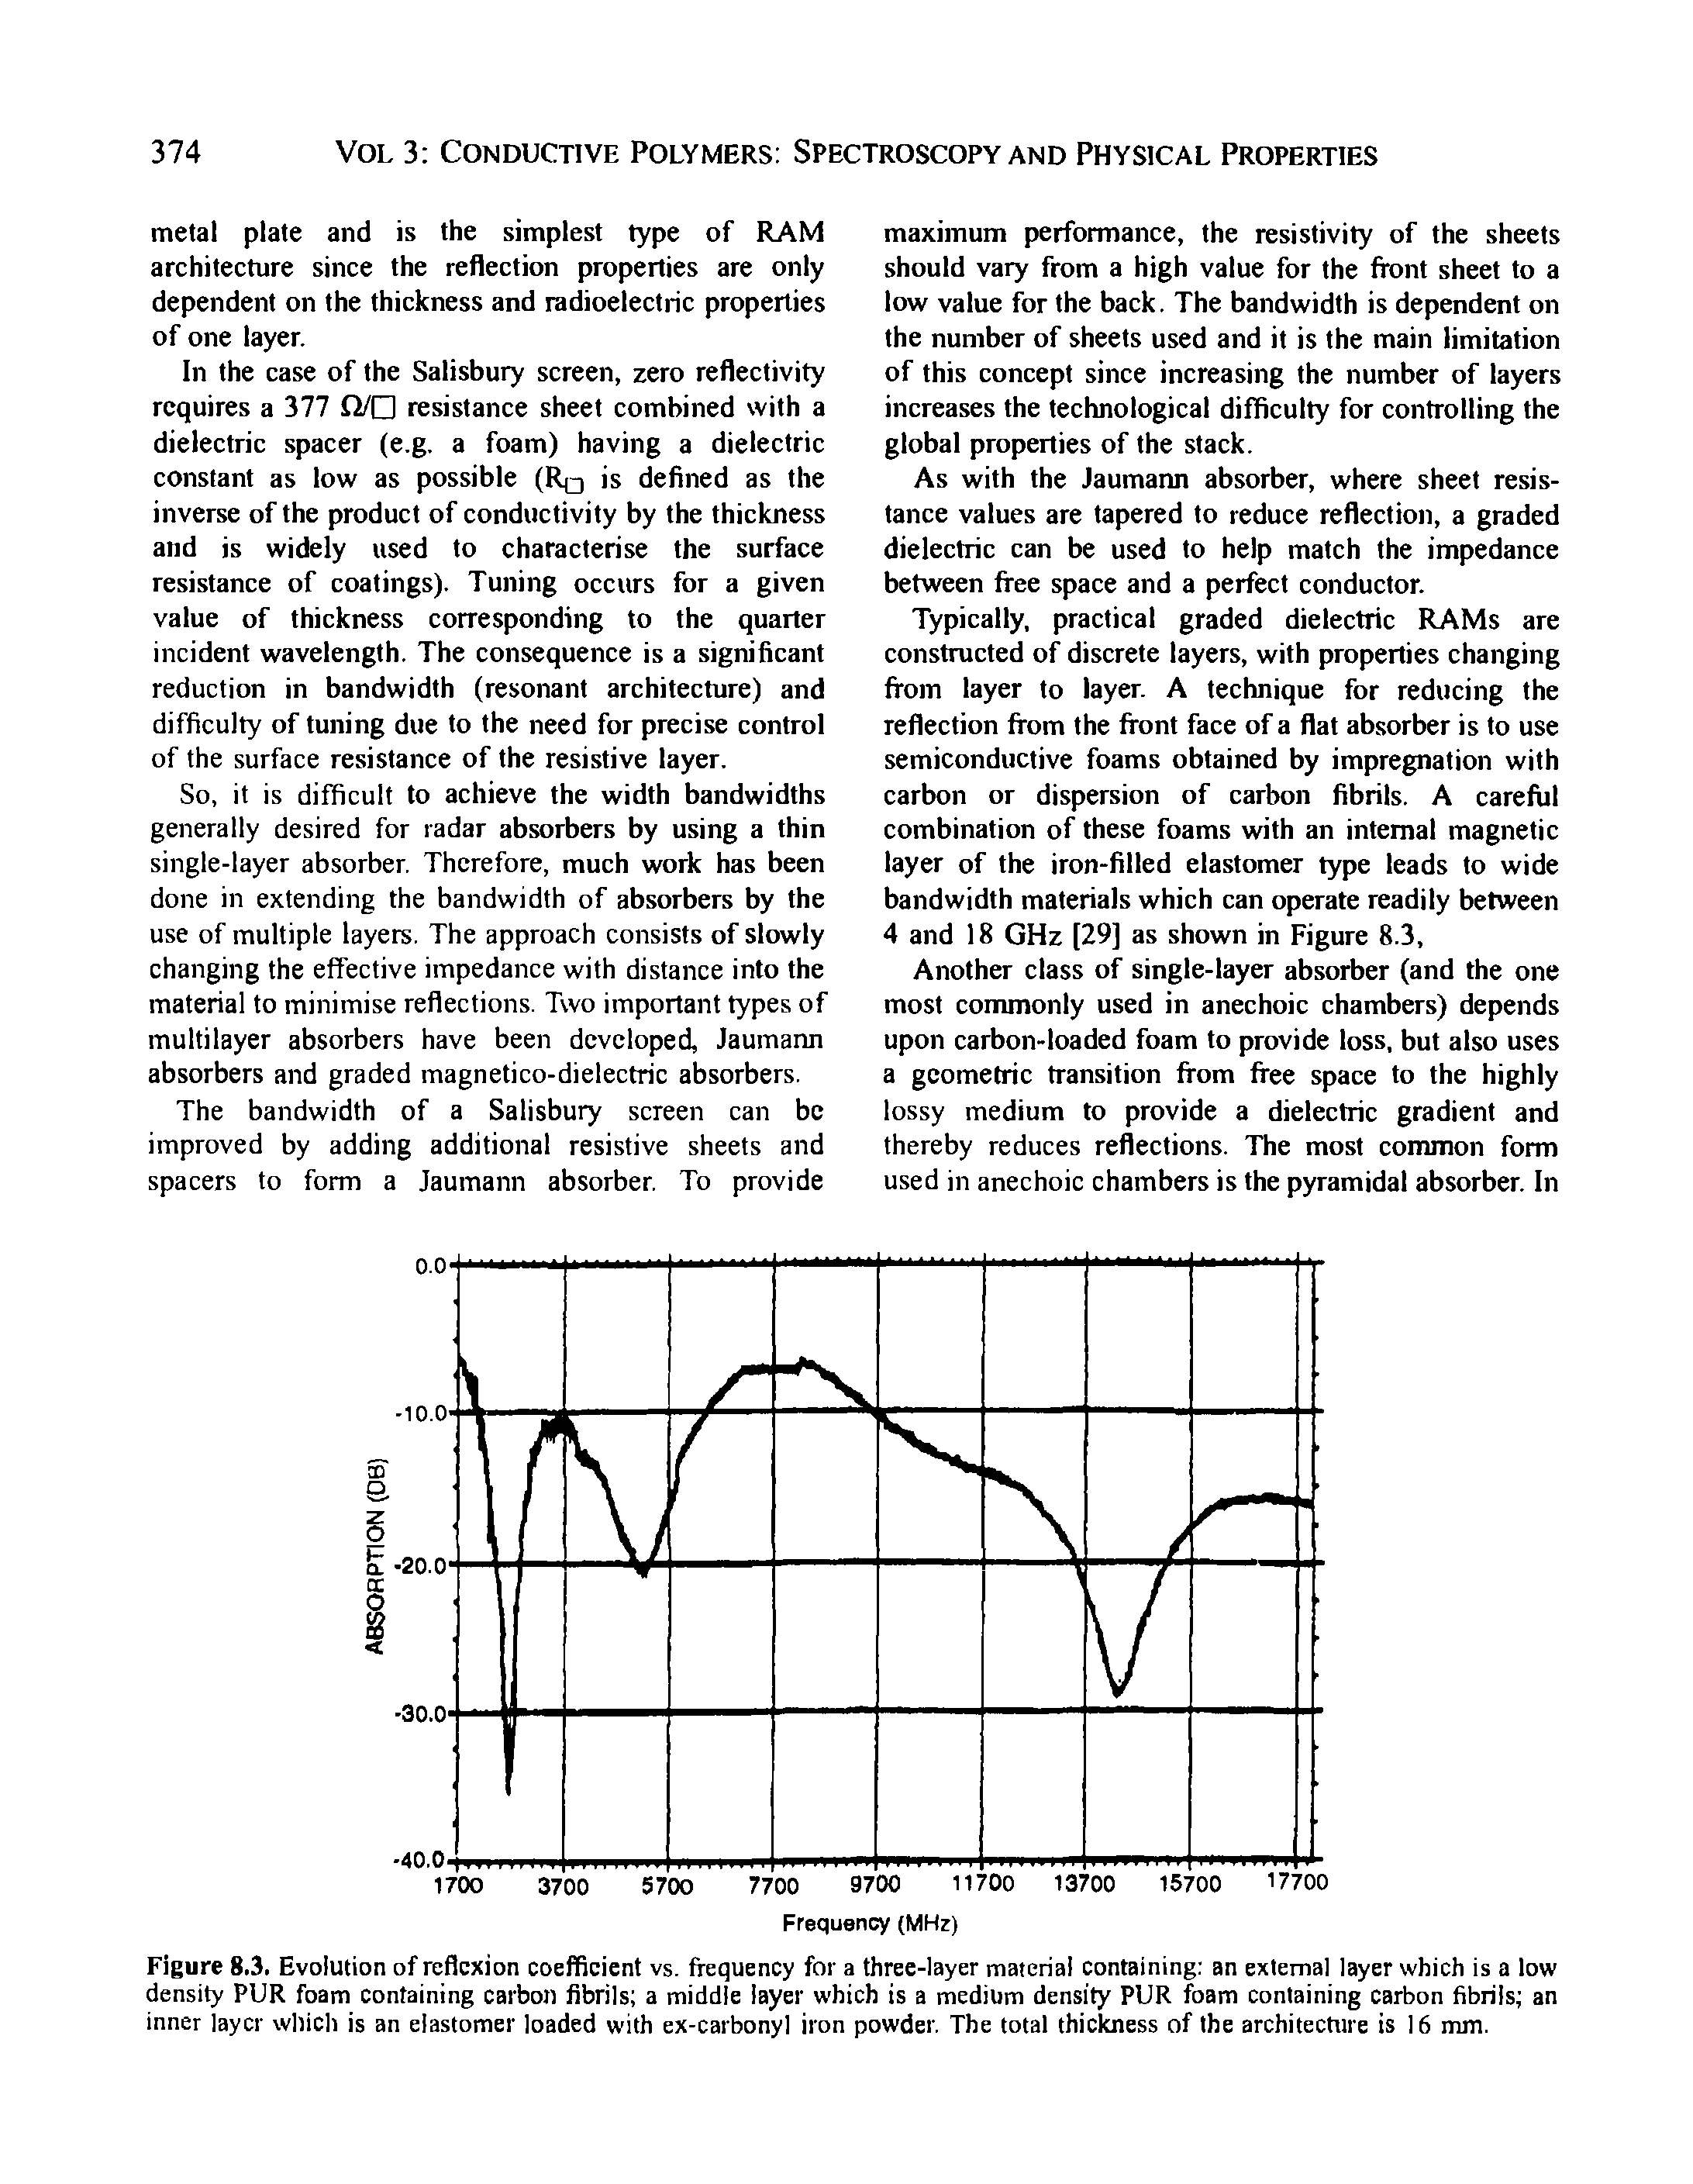 Figure 8.3. Evolution of reflexion coefficient vs. frequency for a three-layer material containing an external layer which is a low density PUR foam containing carbon fibrils a middle layer which is a medium density PUR foam containing carbon fibrils an inner layer which is an elastomer loaded with ex-carbonyl iron powder. The total thickness of the architecture is 16 mm.